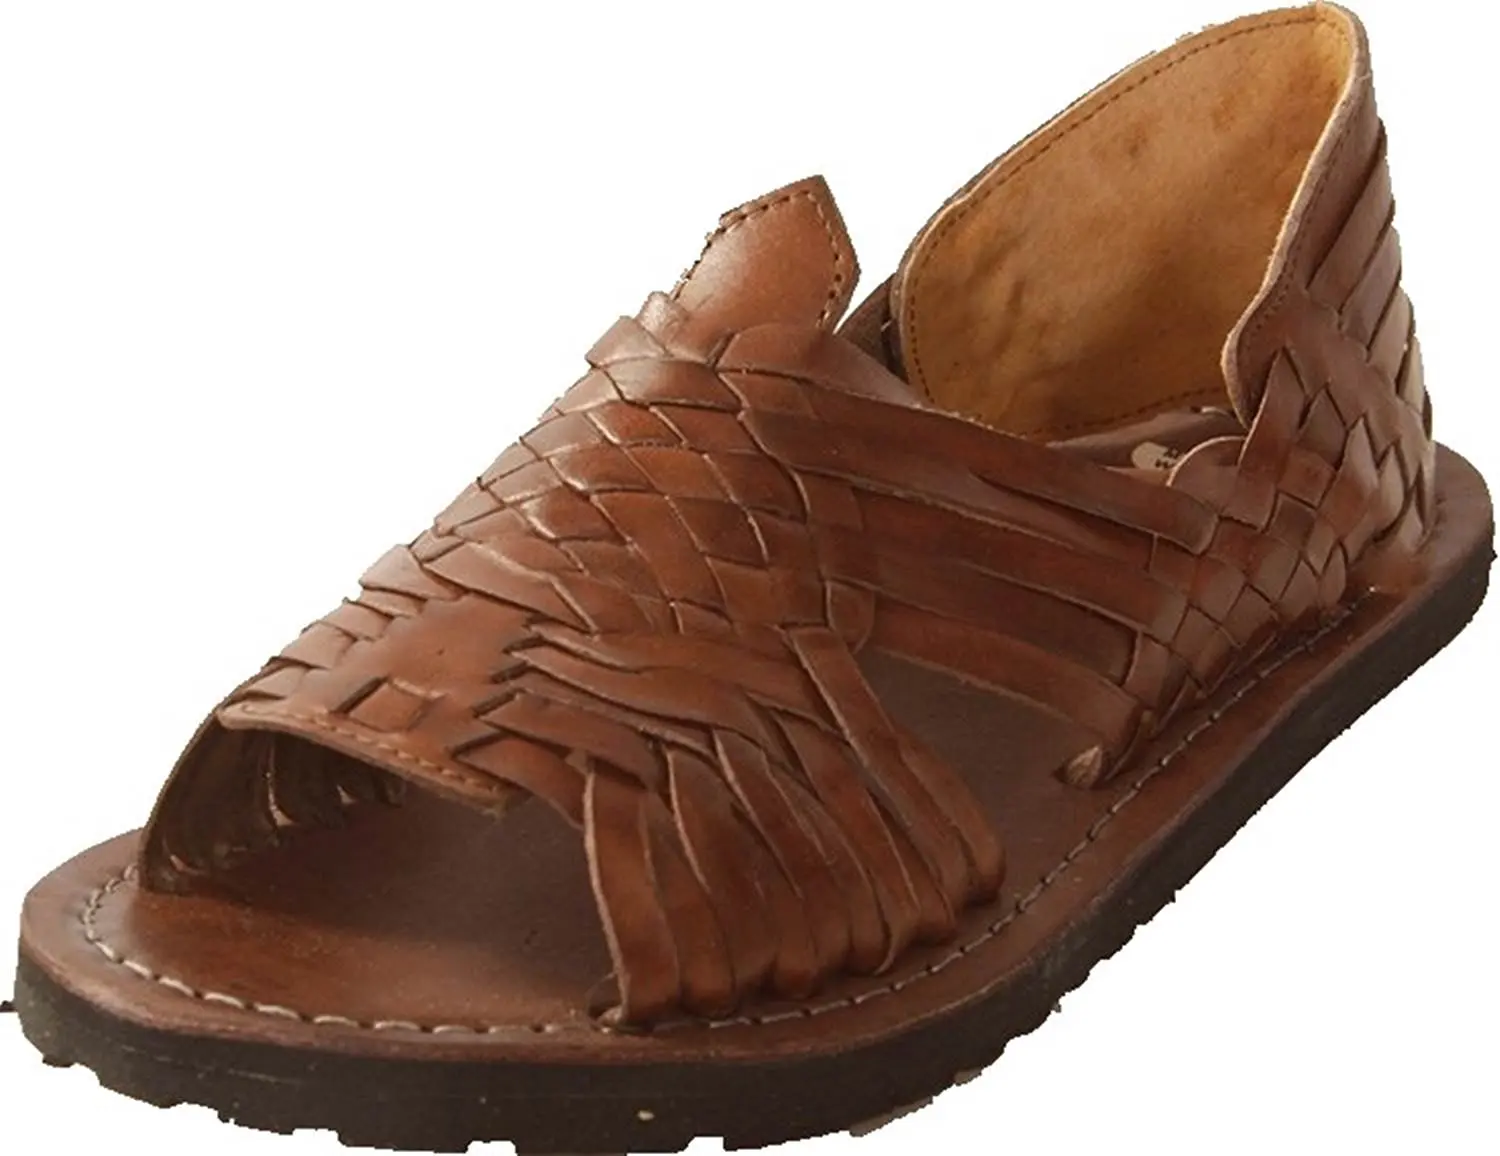 Buy Premium Pachuco Mens Mexican Style Huarache Sandals - Brown in Cheap Price on Alibaba.com